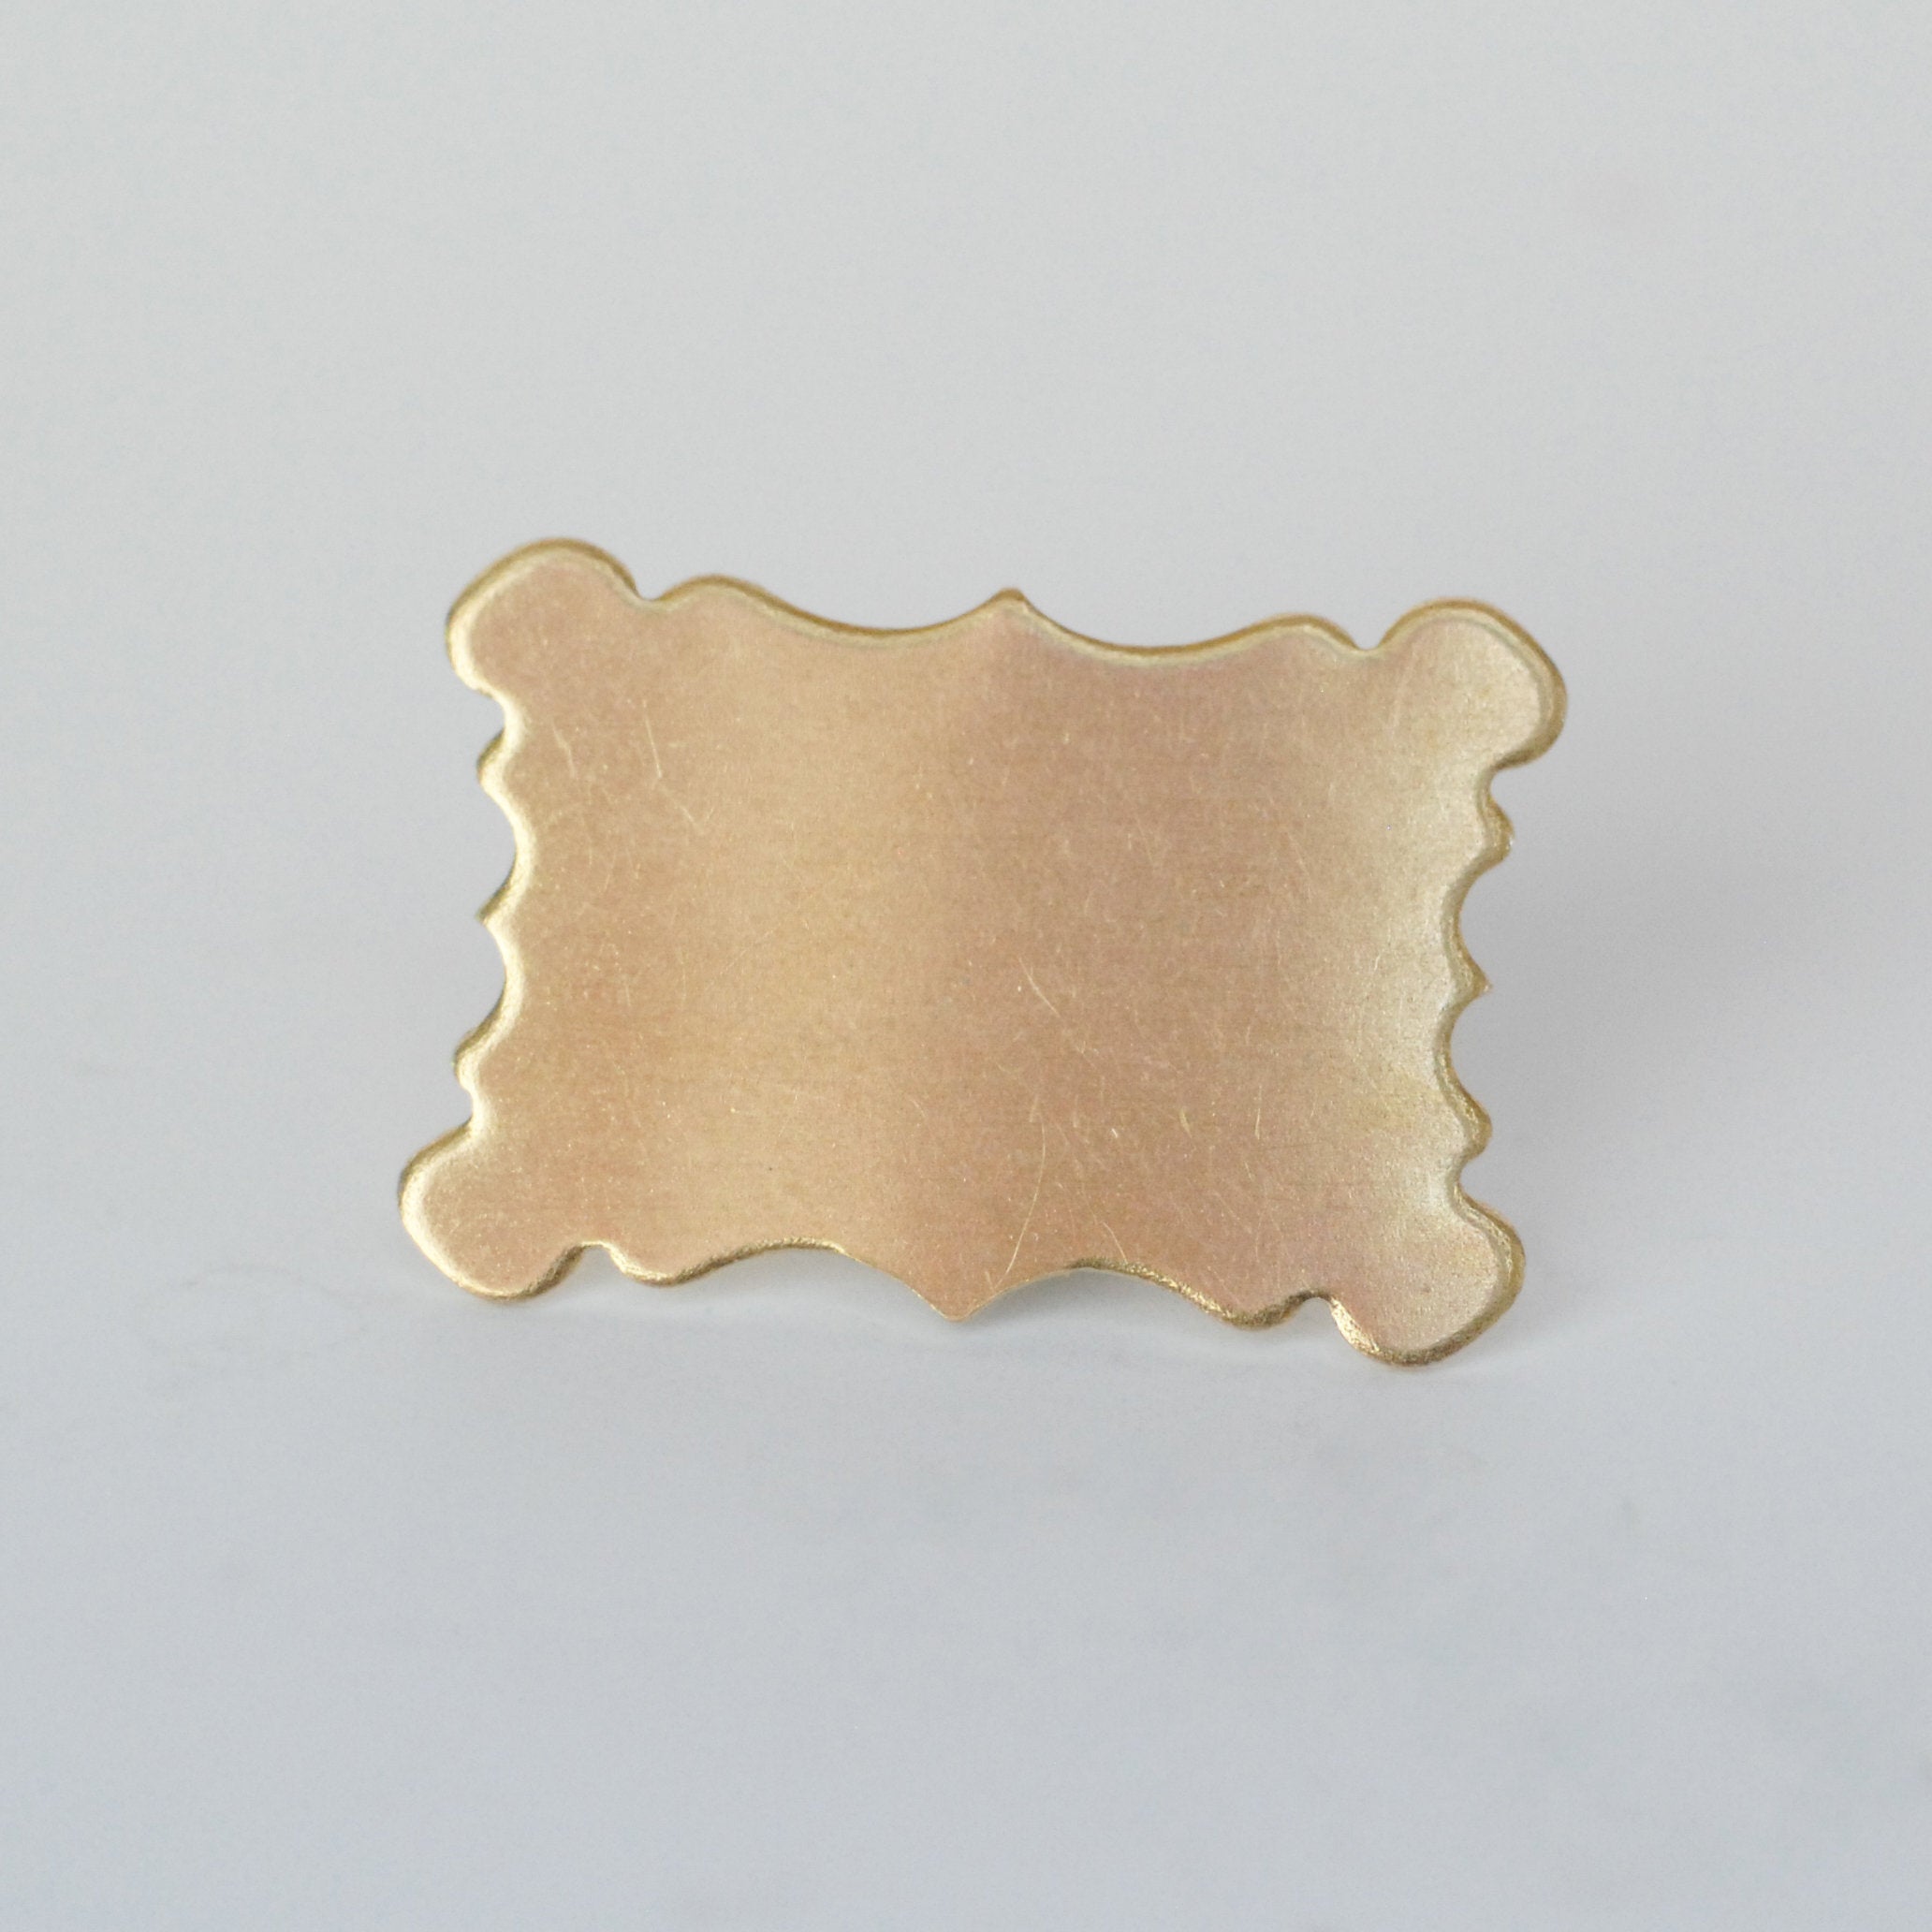 Scalloped box frame metal blanks in copper, brass, bronze, or nickel silver 37.5mm x 26mm for jewelry making